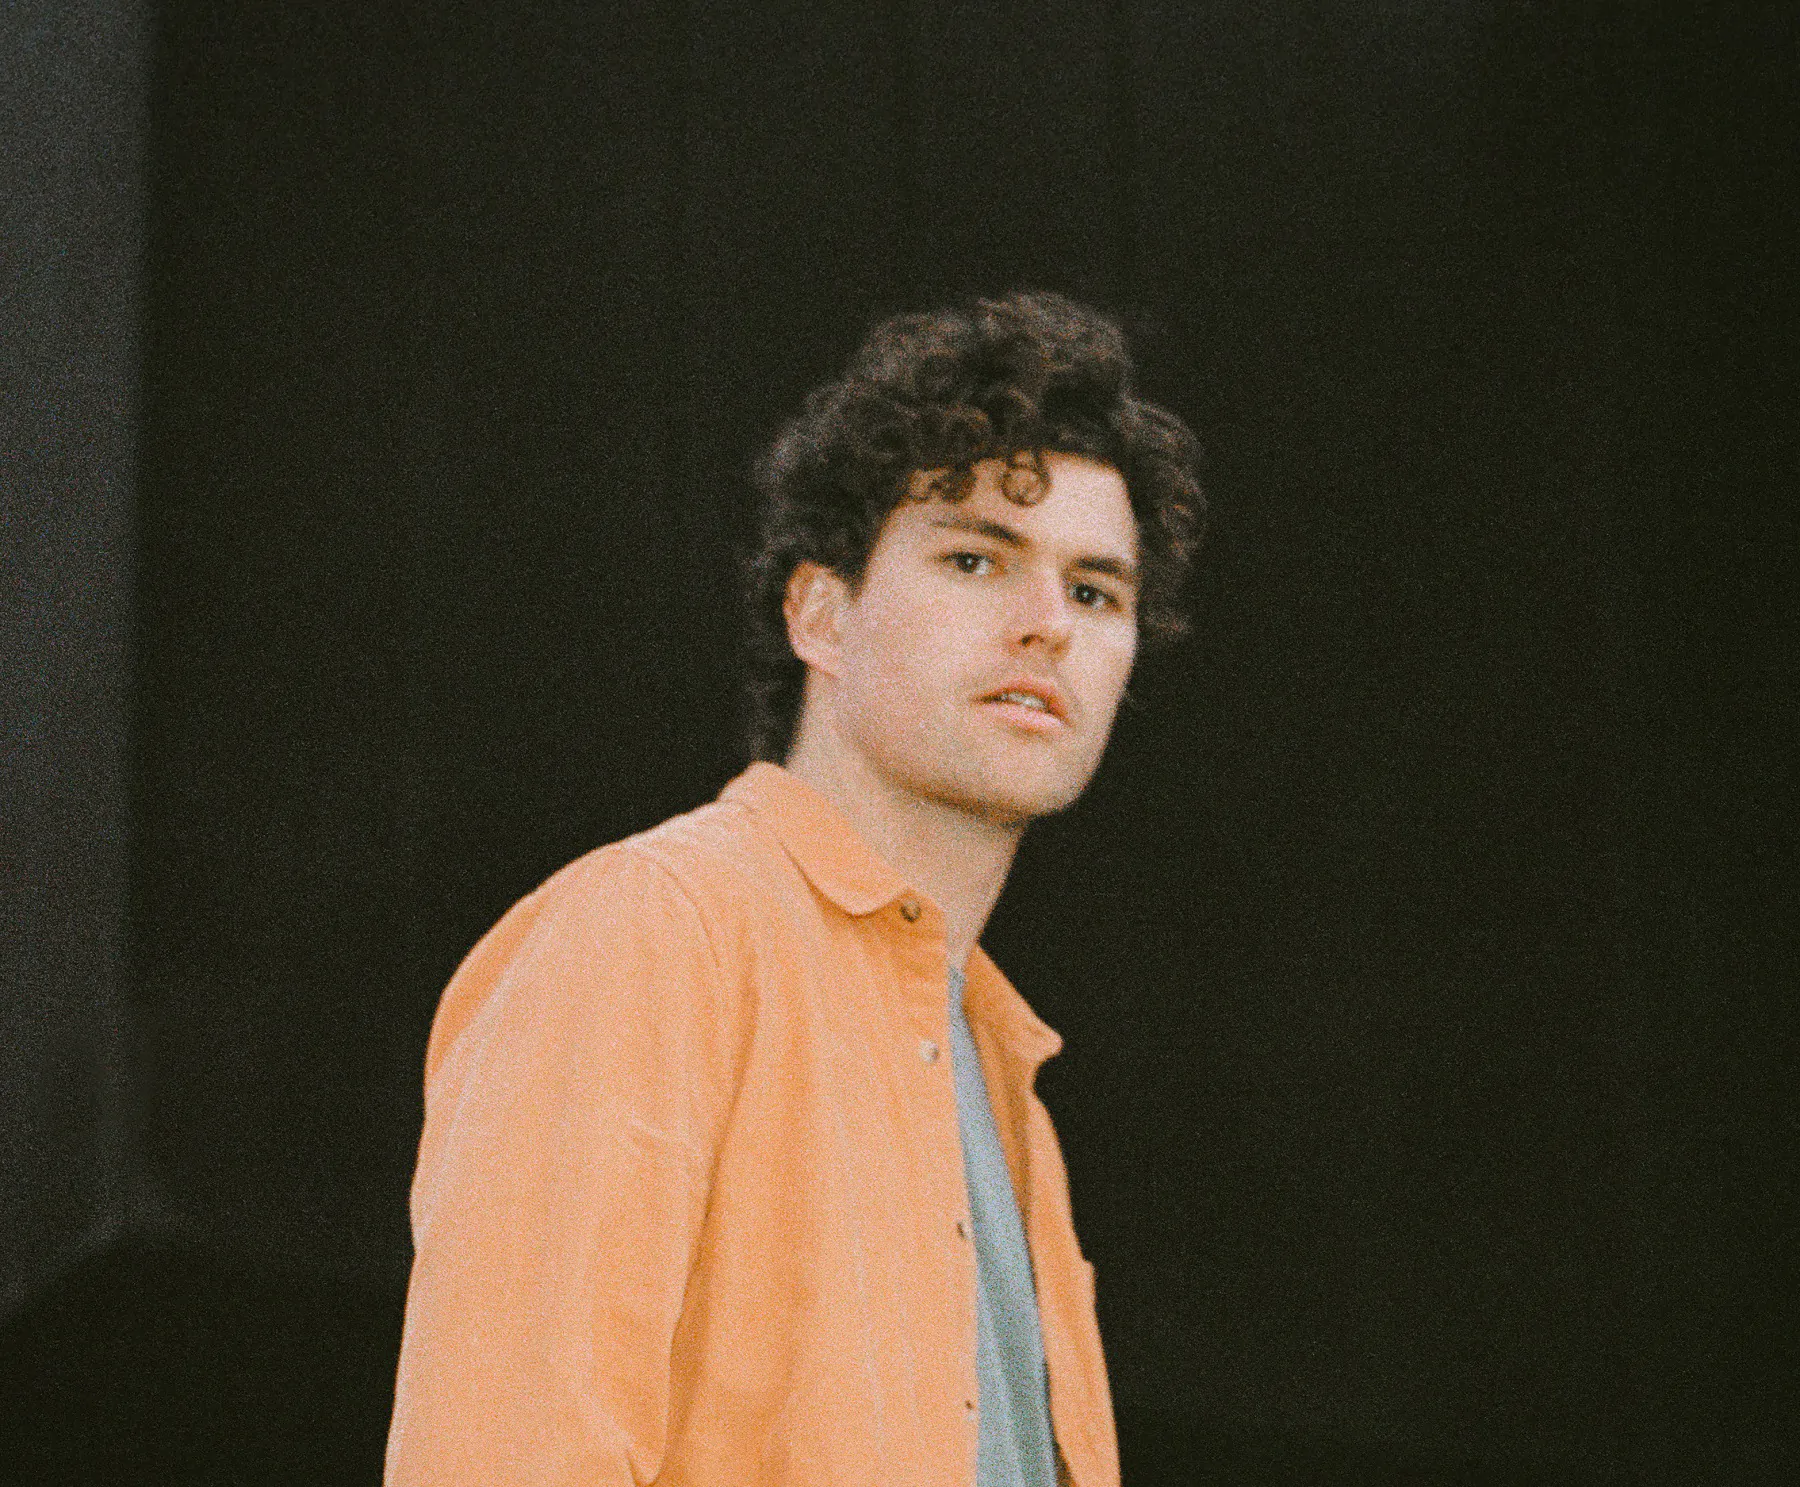 VANCE JOY unveils video for new single ‘Missing Piece’ – Watch Now!